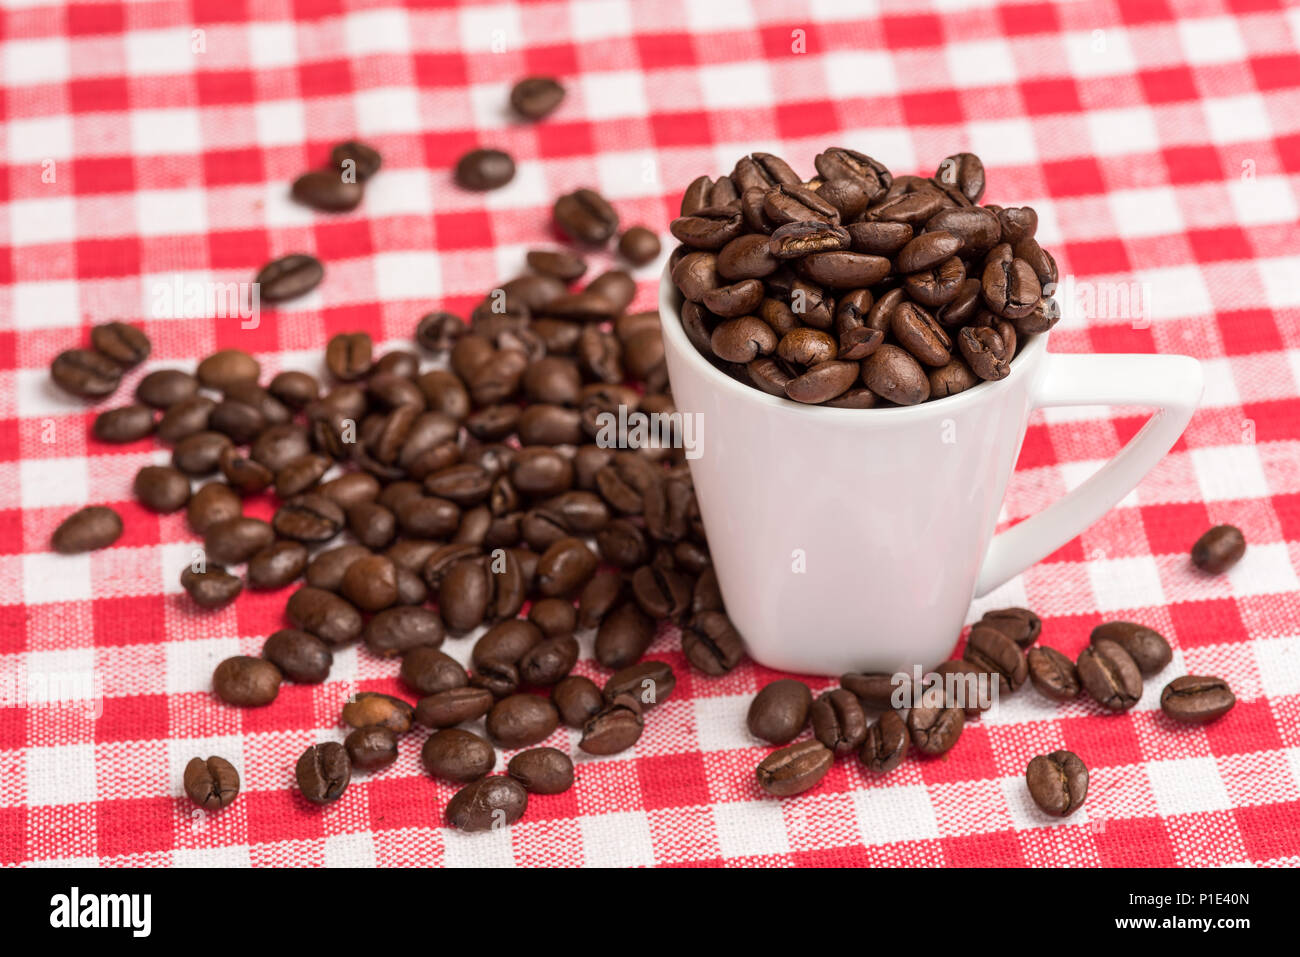 A white coffee mug is  filled with brown coffee beans. The coffee beans are also spread out on the kitchen table with a red checkered tablecloth as a  Stock Photo